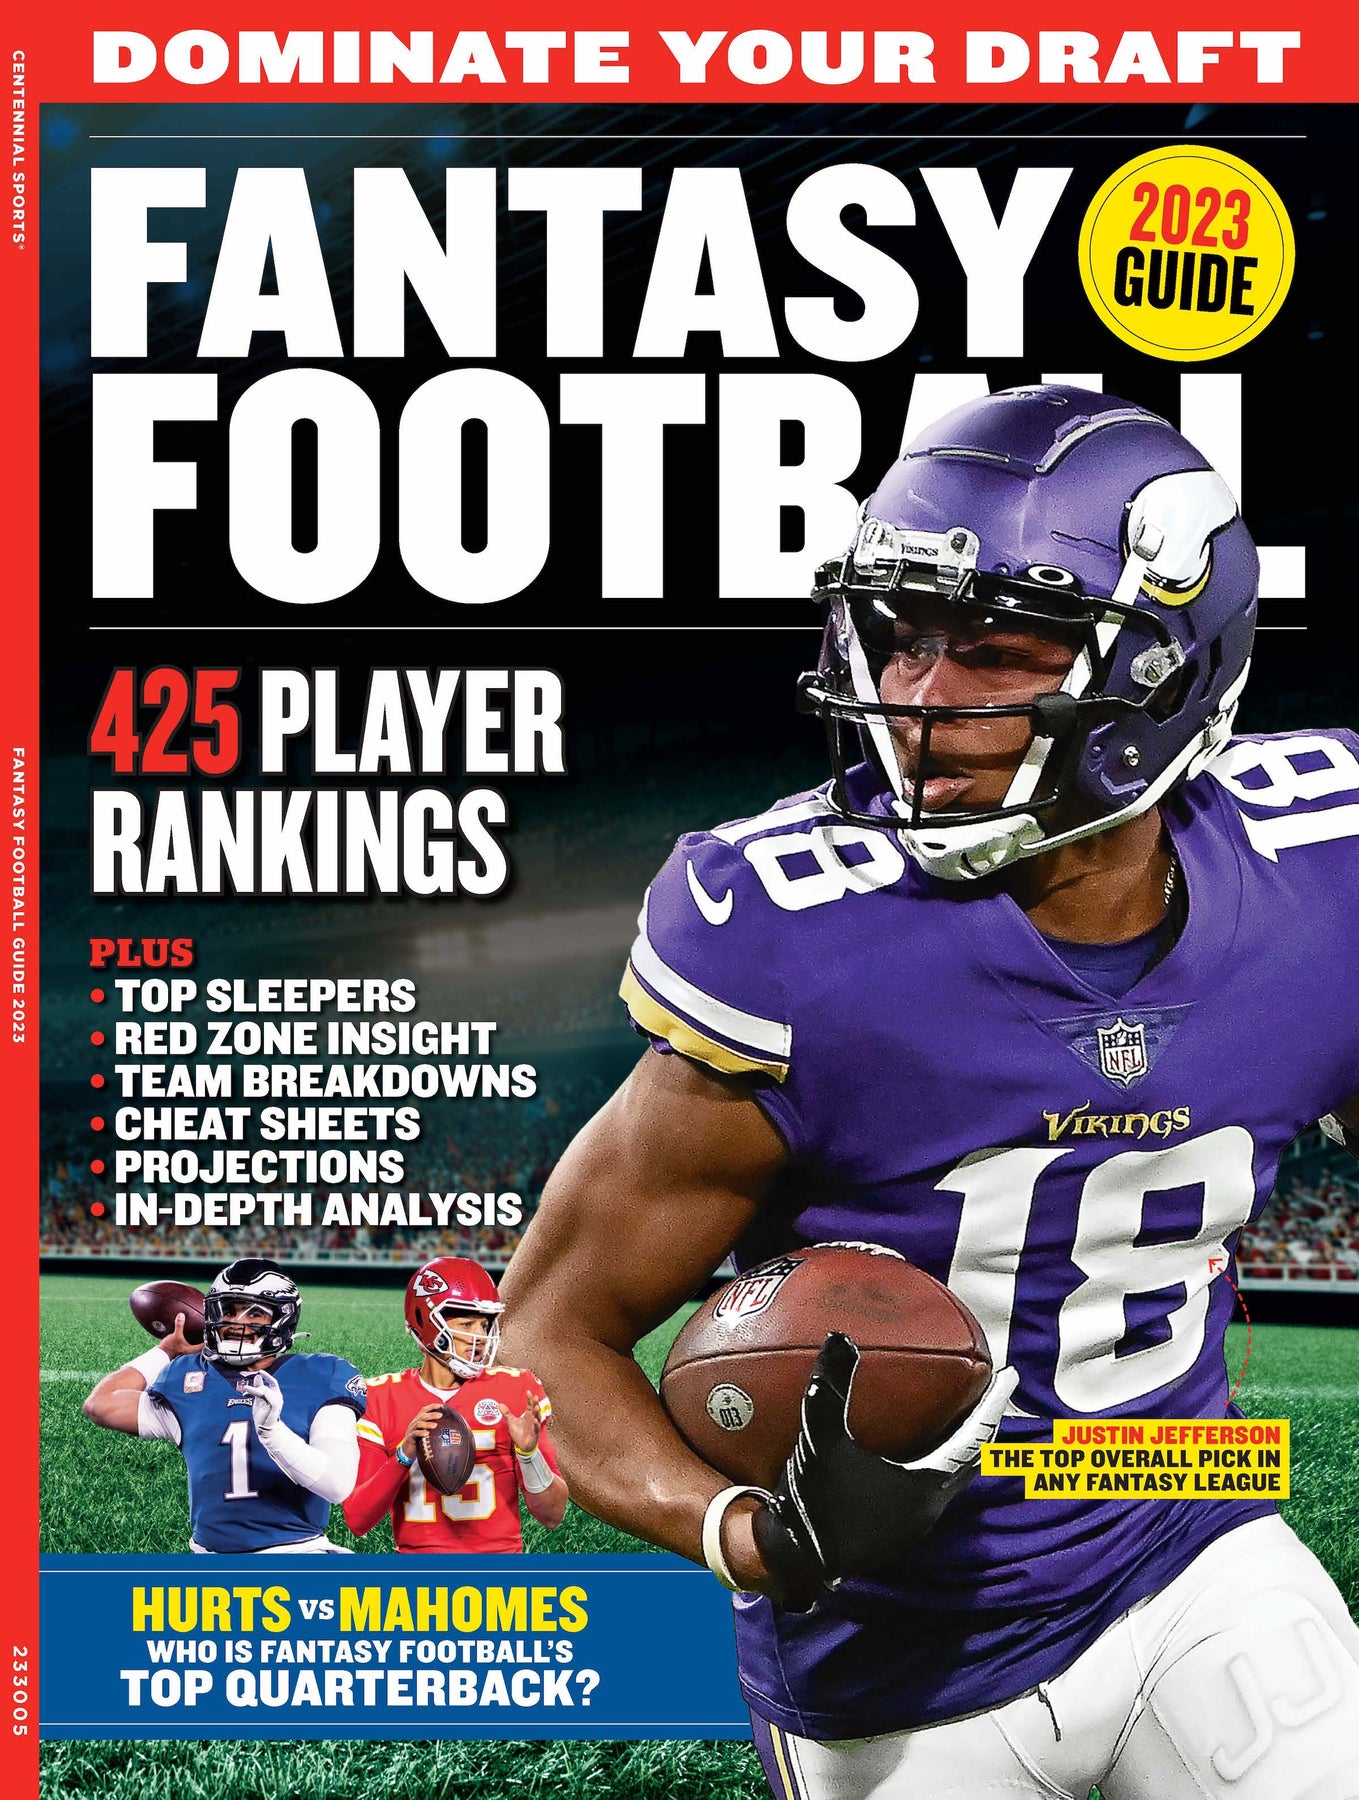 Fantasy Football 2023 Guide - 425 Player Rankings, Plus Top Sleepers, Red  Zone Insights, Team Breakdowns, Cheat Sheets, Projections & In Depth